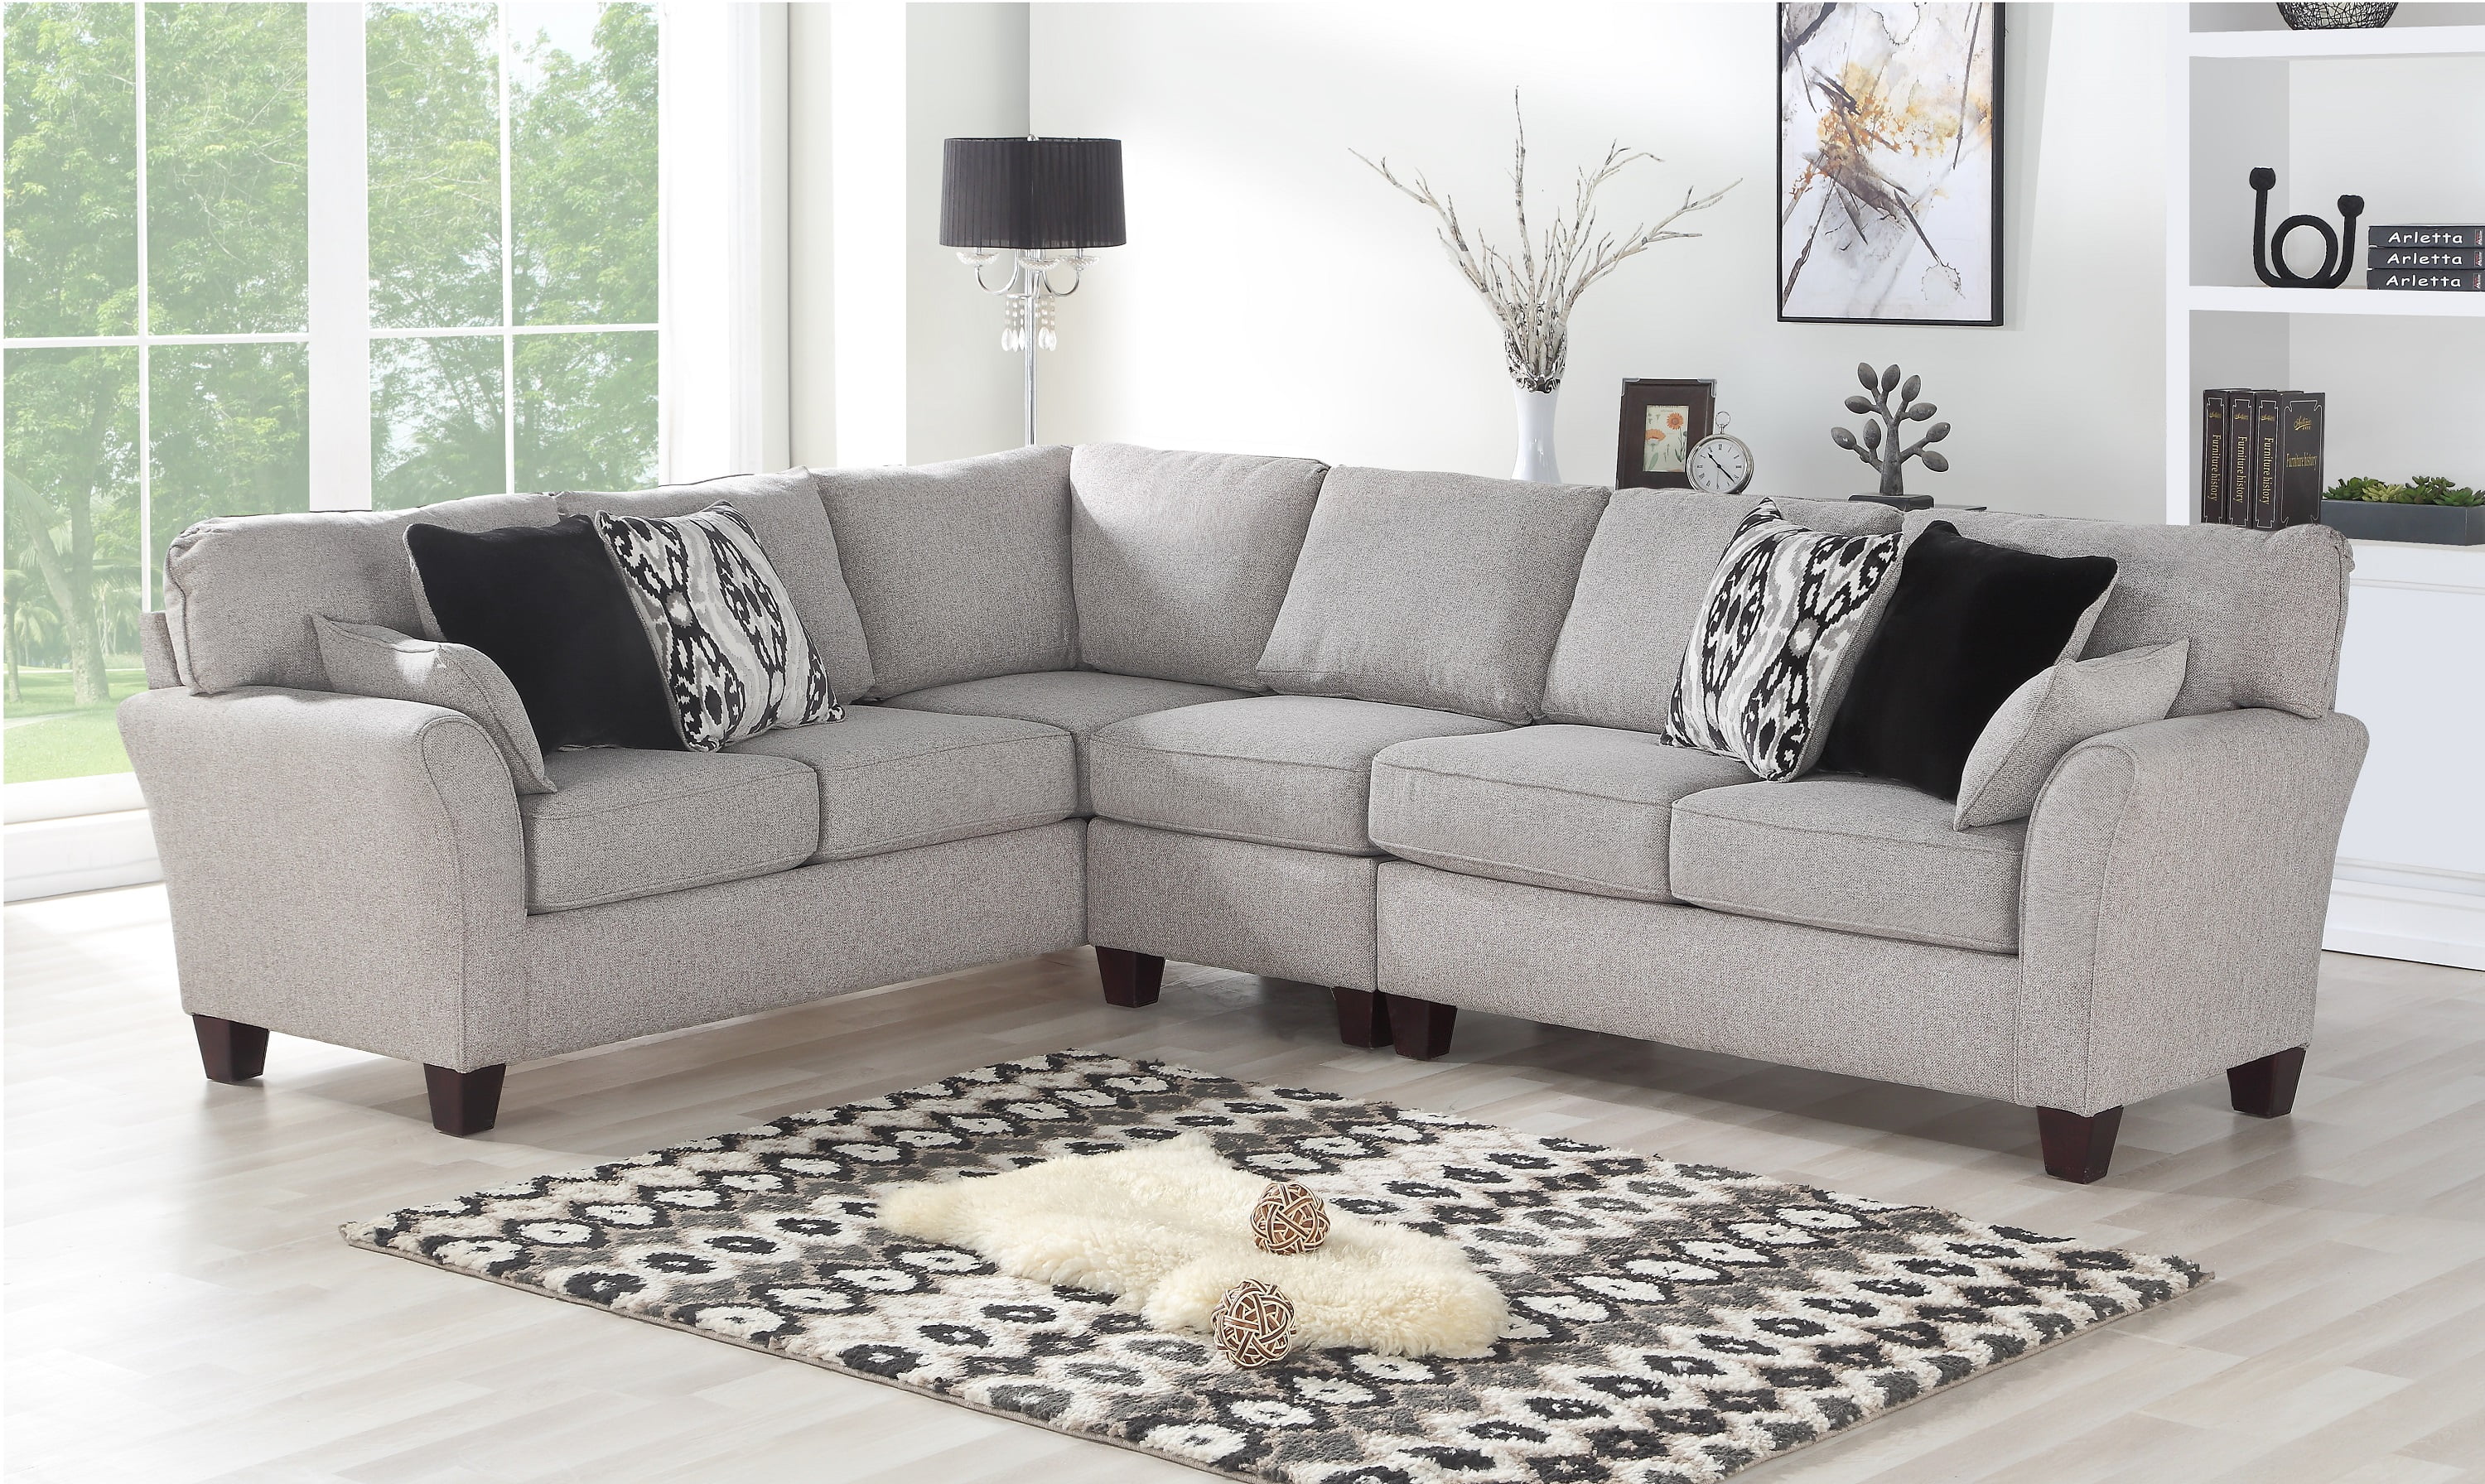 Seating Height Living Room Couch Chairs